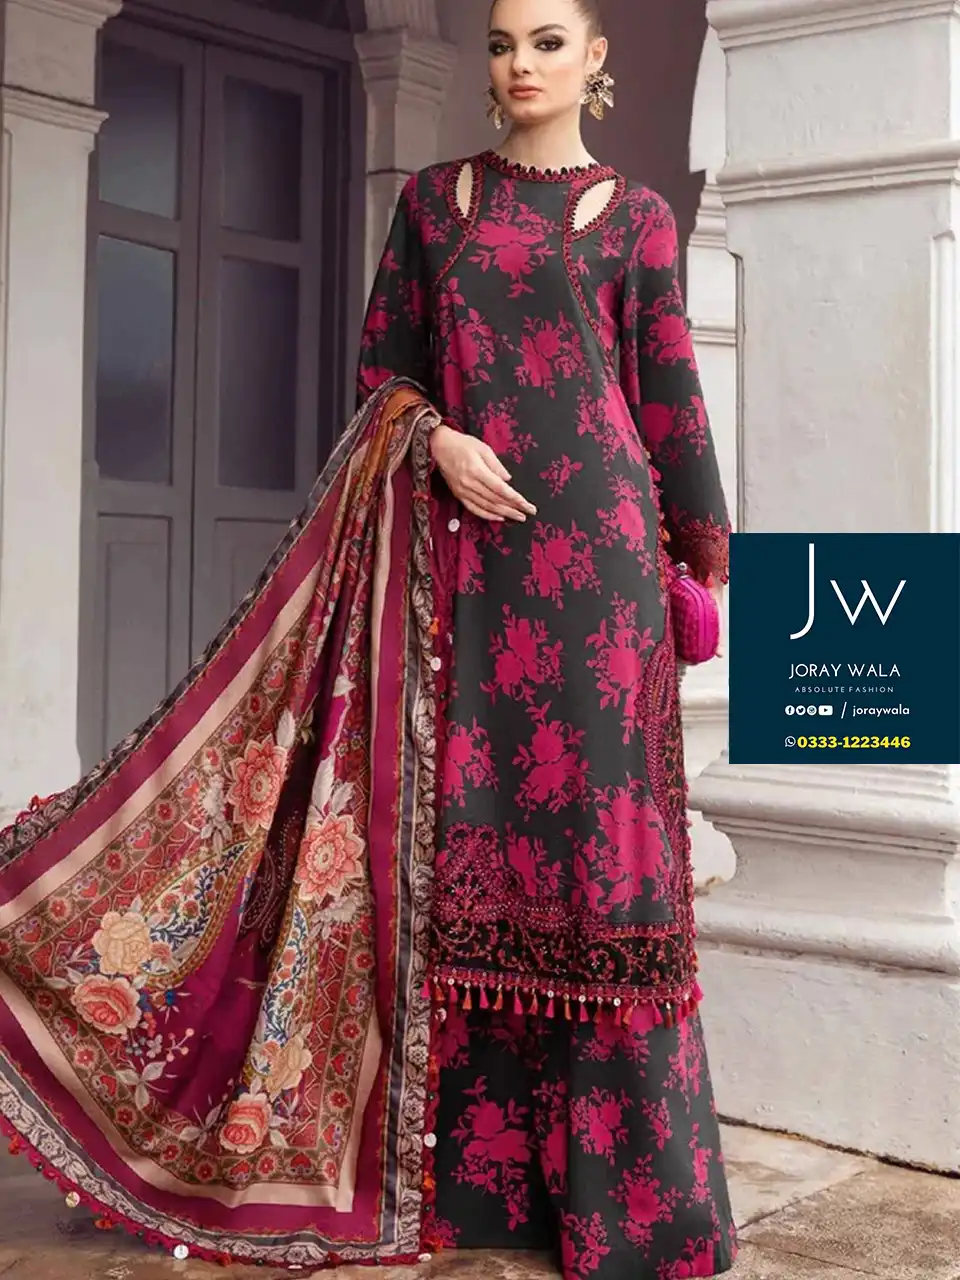 Party wear fancy lawn embroidered maria b m print 3 piece suit, color maroon and black with printed chiffon dupatta